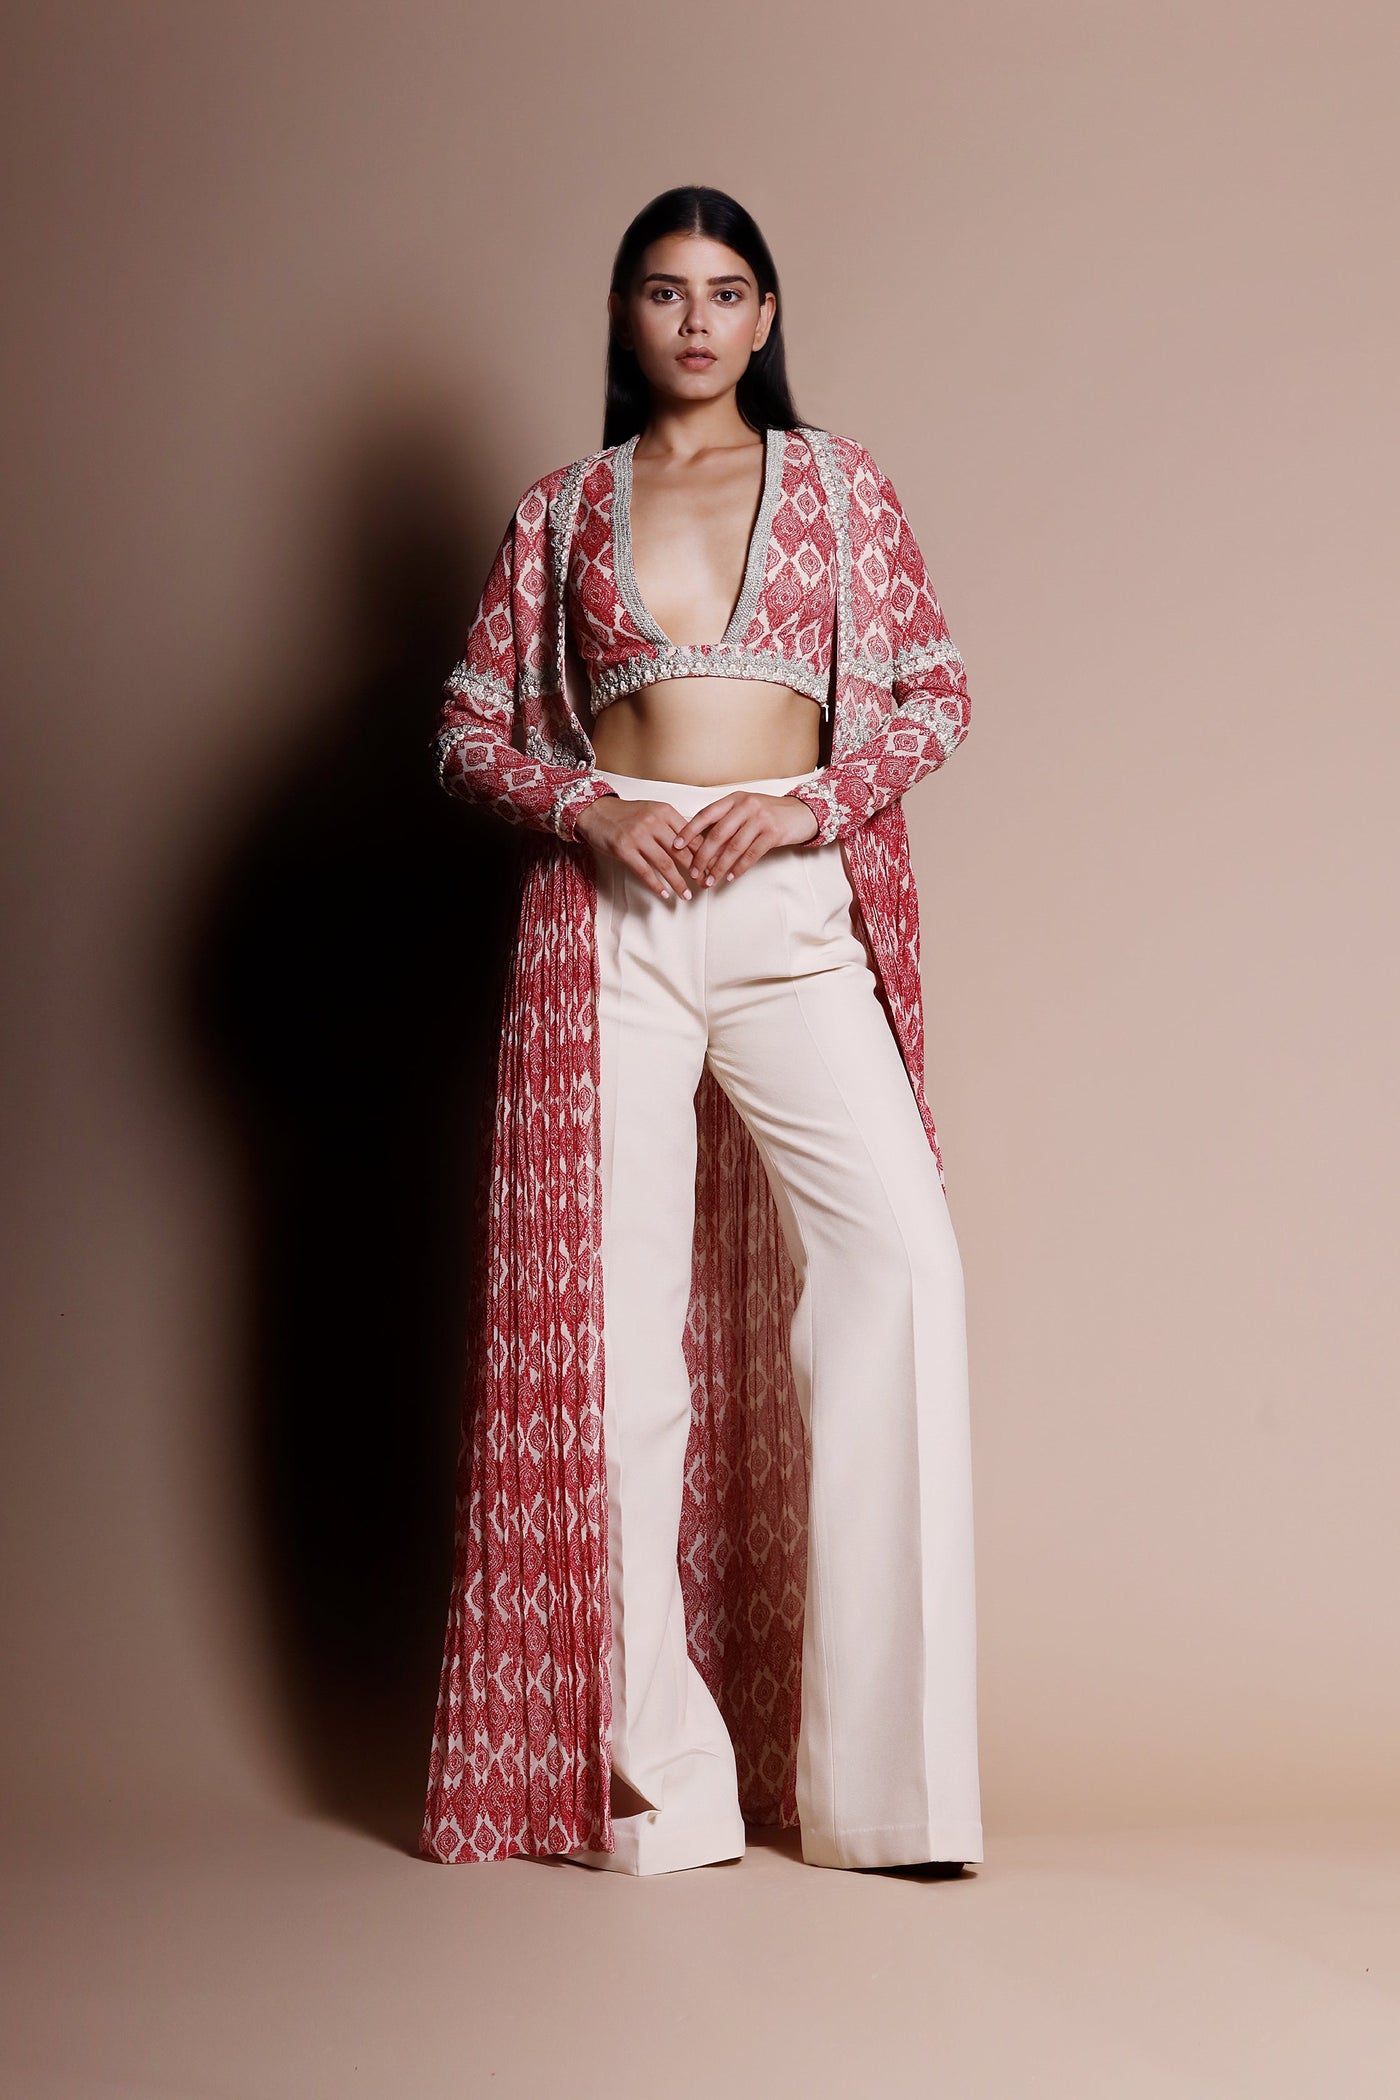 A Printed Embellished Blouse & Cape With Trousers - BHUMIKA SHARMA